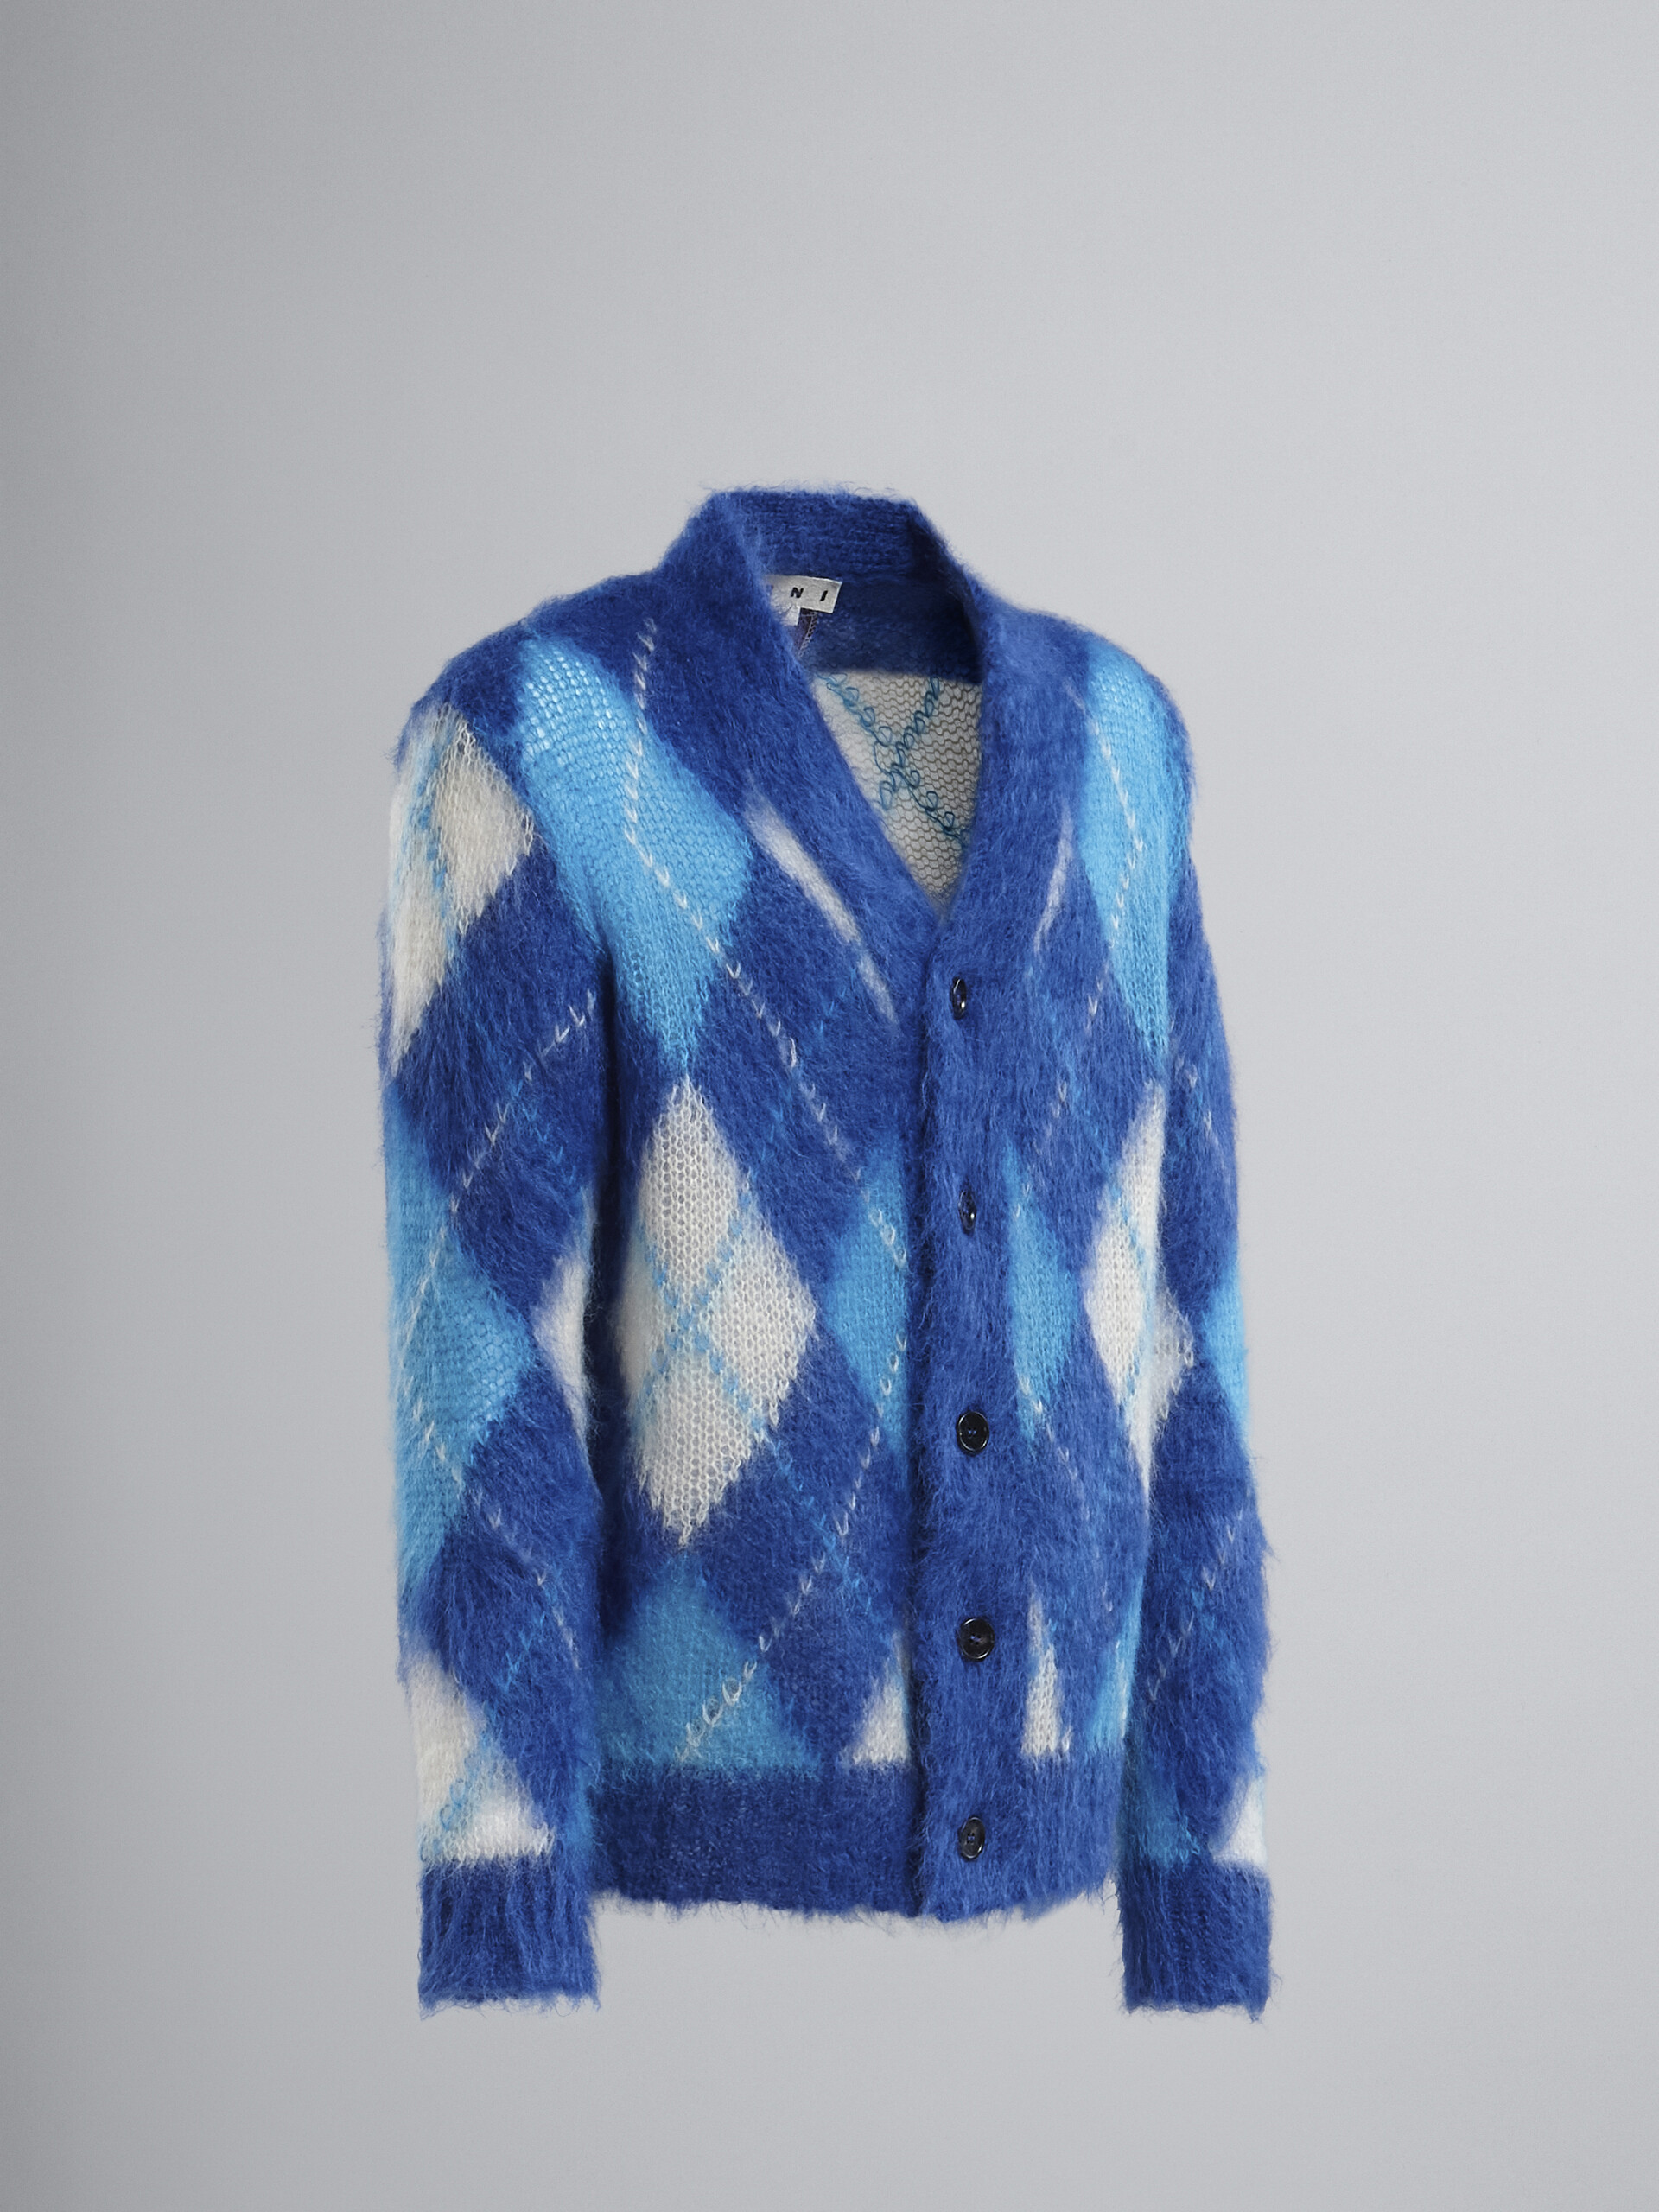 Iconic mohair Argyle cardigan - Pullovers - Image 2